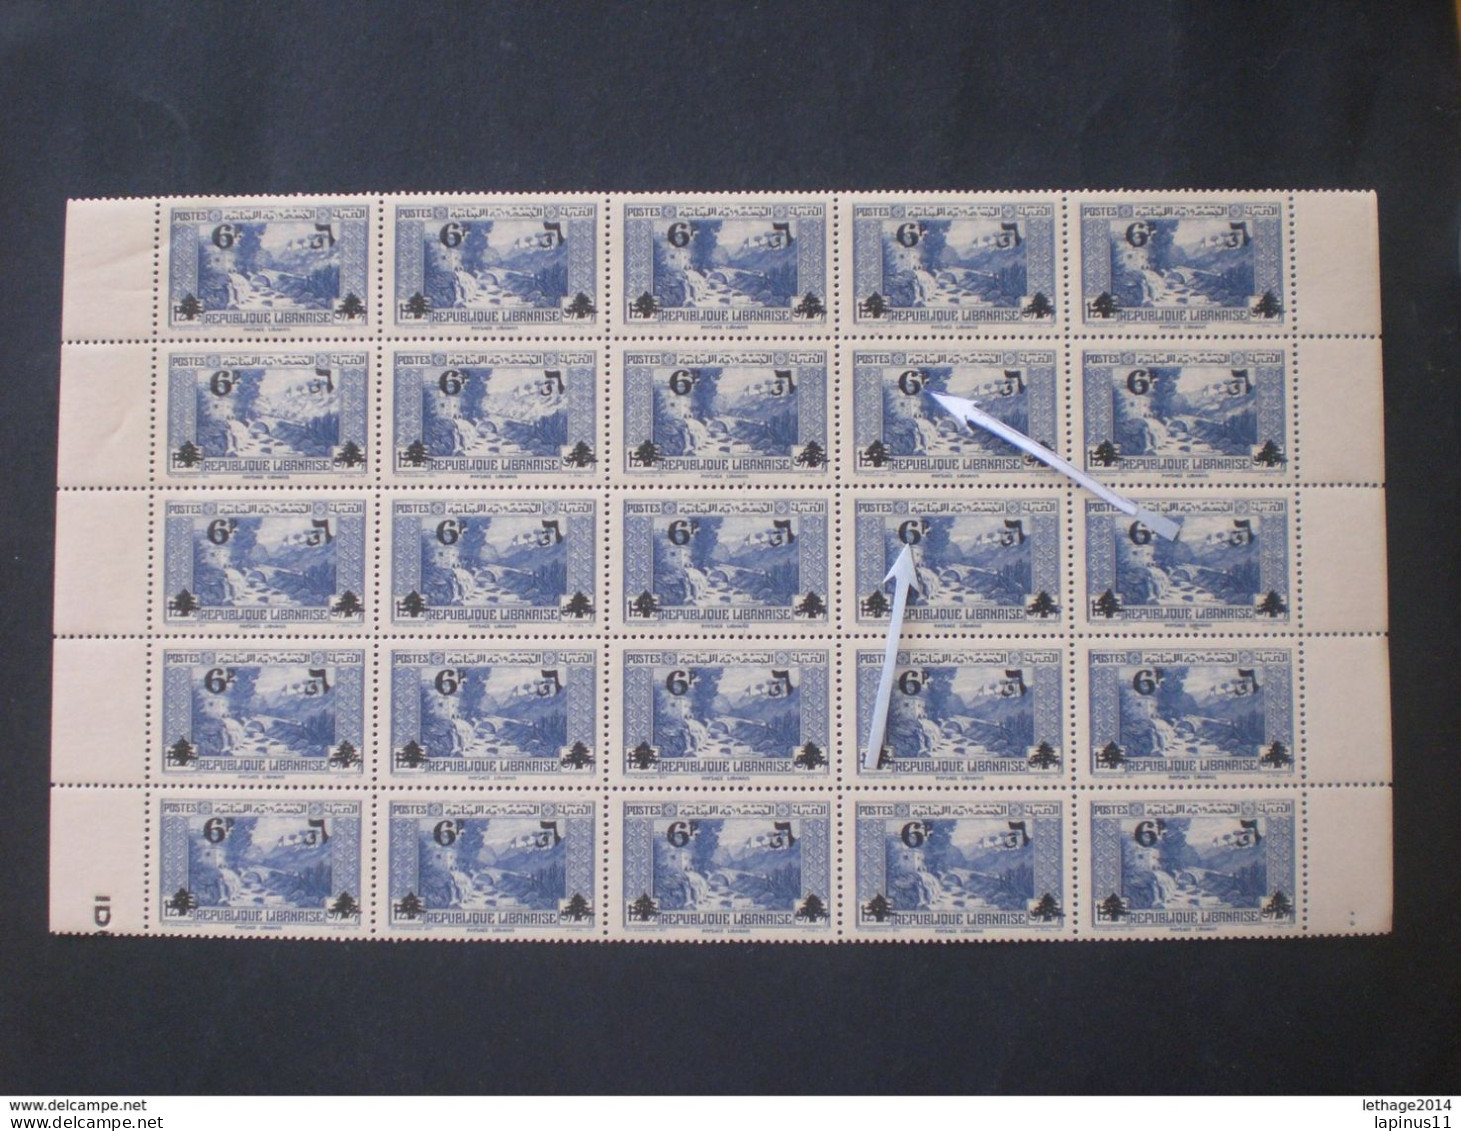 GRAN LIBAN لبنان LEBANON 1943 TIMBRES DE 1937-40 SURCHARGES YVERT N. 185 MNH ERRORE Incomplete Print Of Number 6 - Lebanon